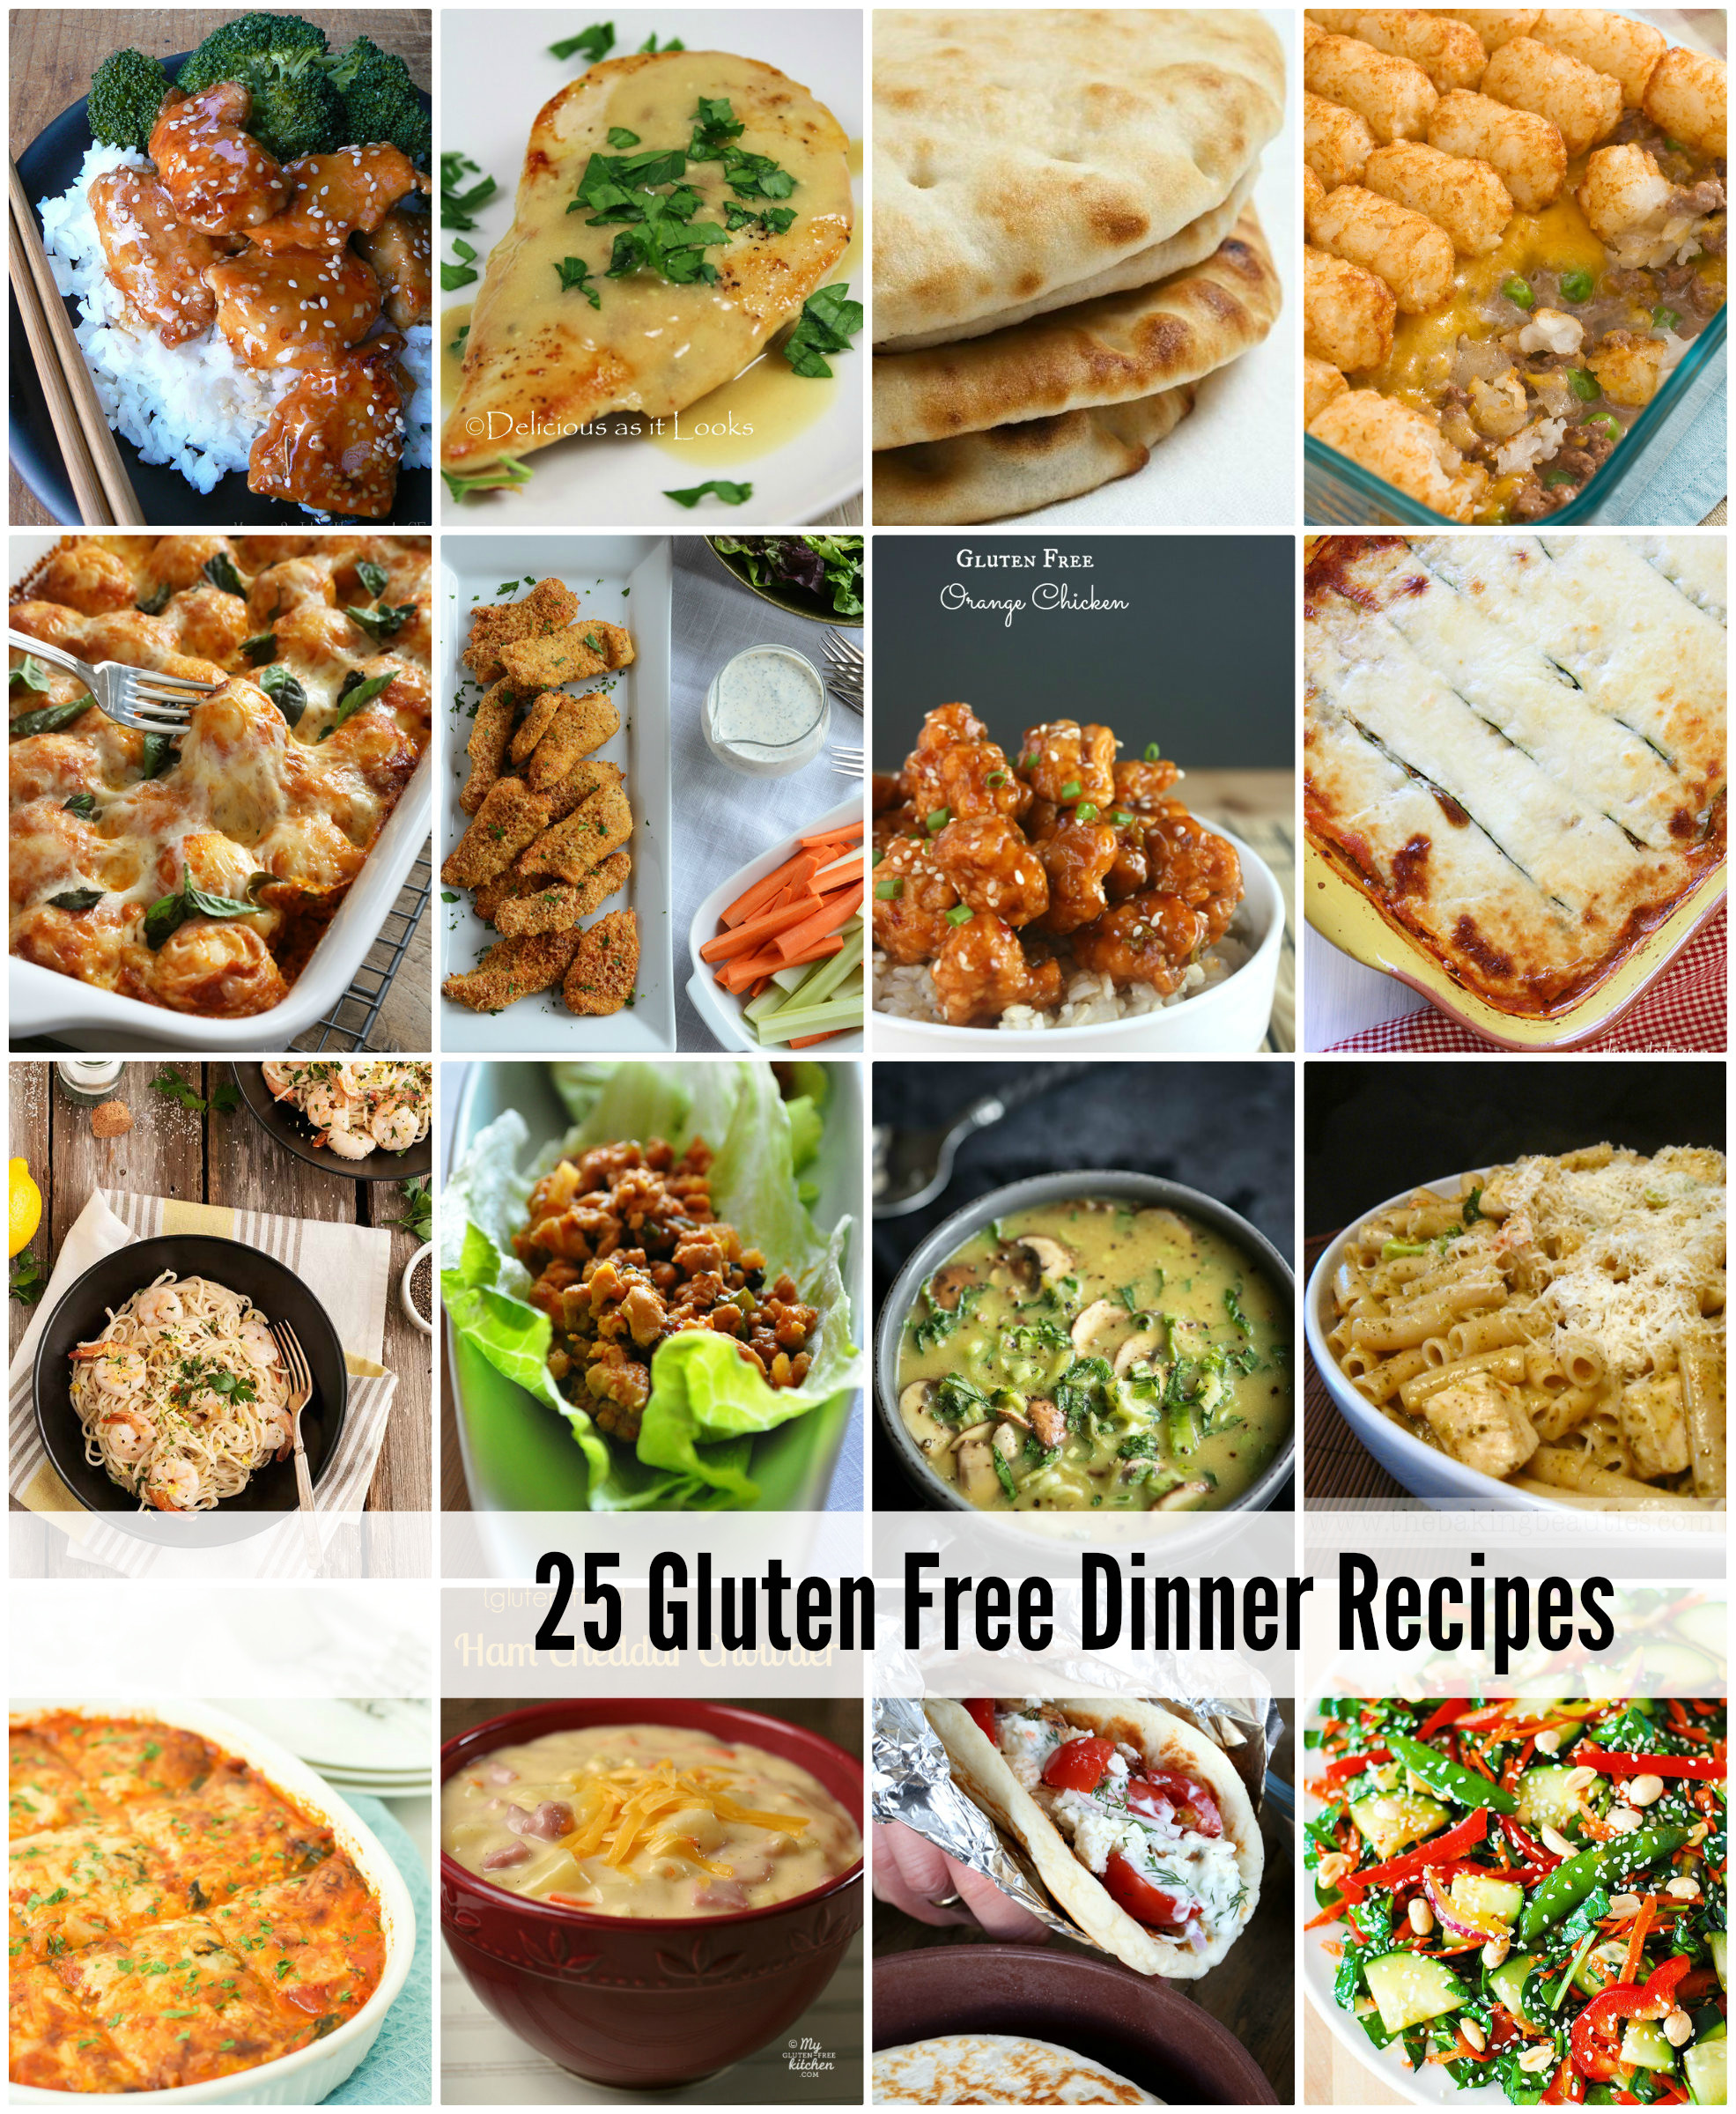 Gluten Free Meal Recipes
 The gallery for Gluten Free Dinner Recipes